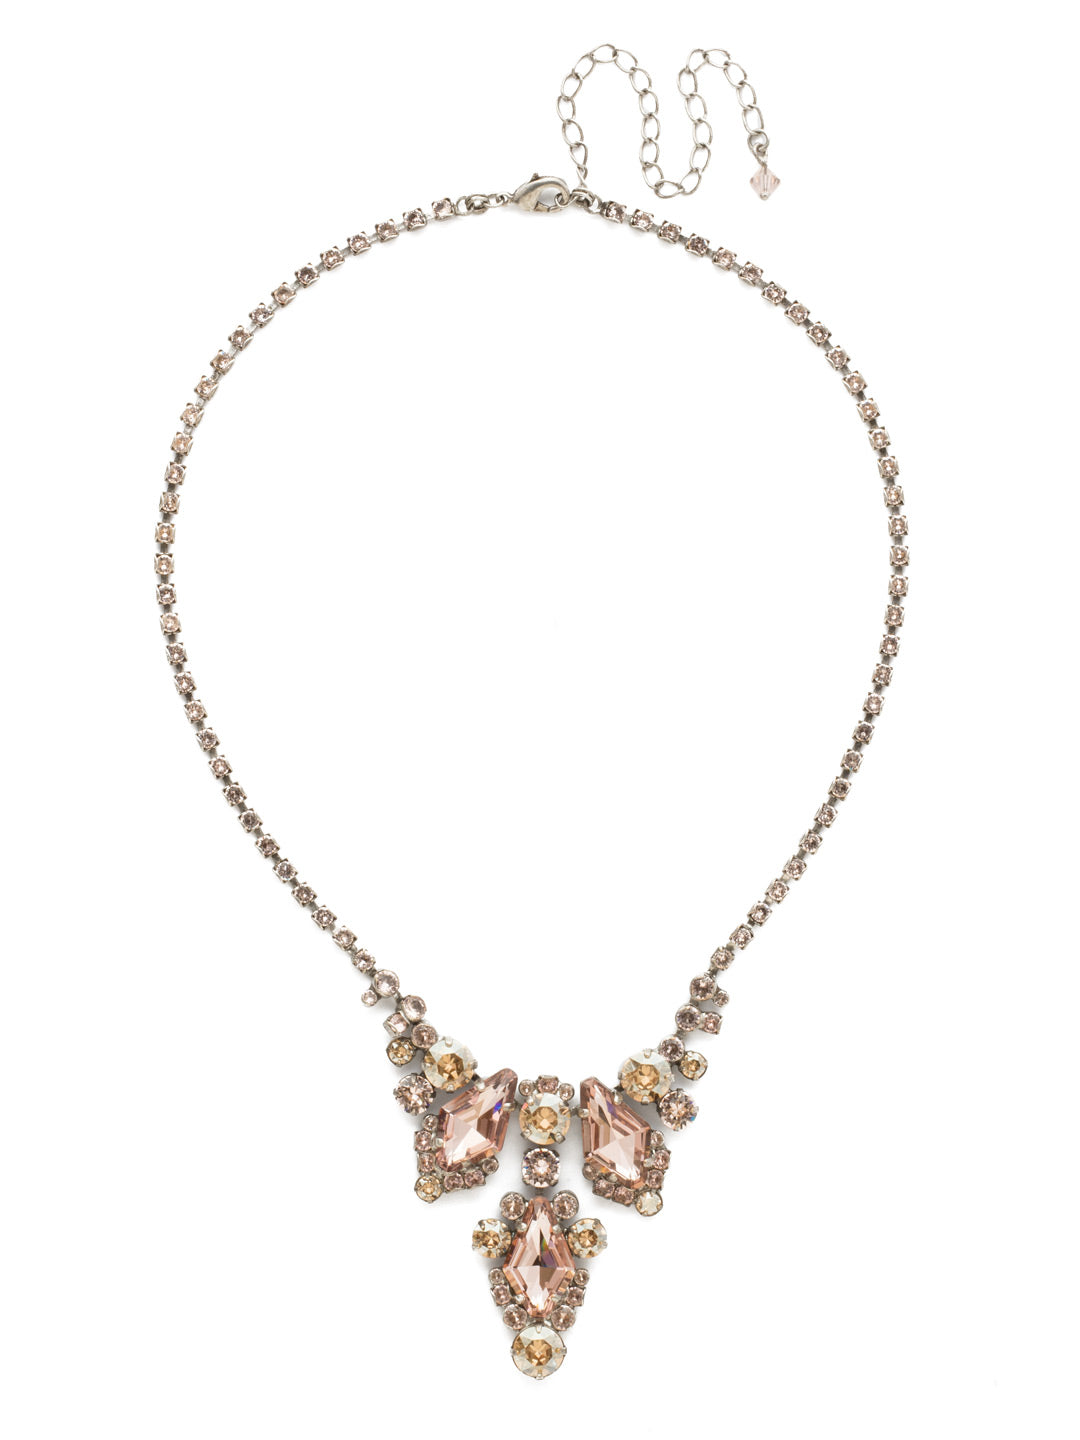 Alder Statement Necklace - NDT10ASSBL - <p>Three rhombus crystals are accented with glimmering rounds in this simple, chic style. From Sorrelli's Satin Blush collection in our Antique Silver-tone finish.</p>